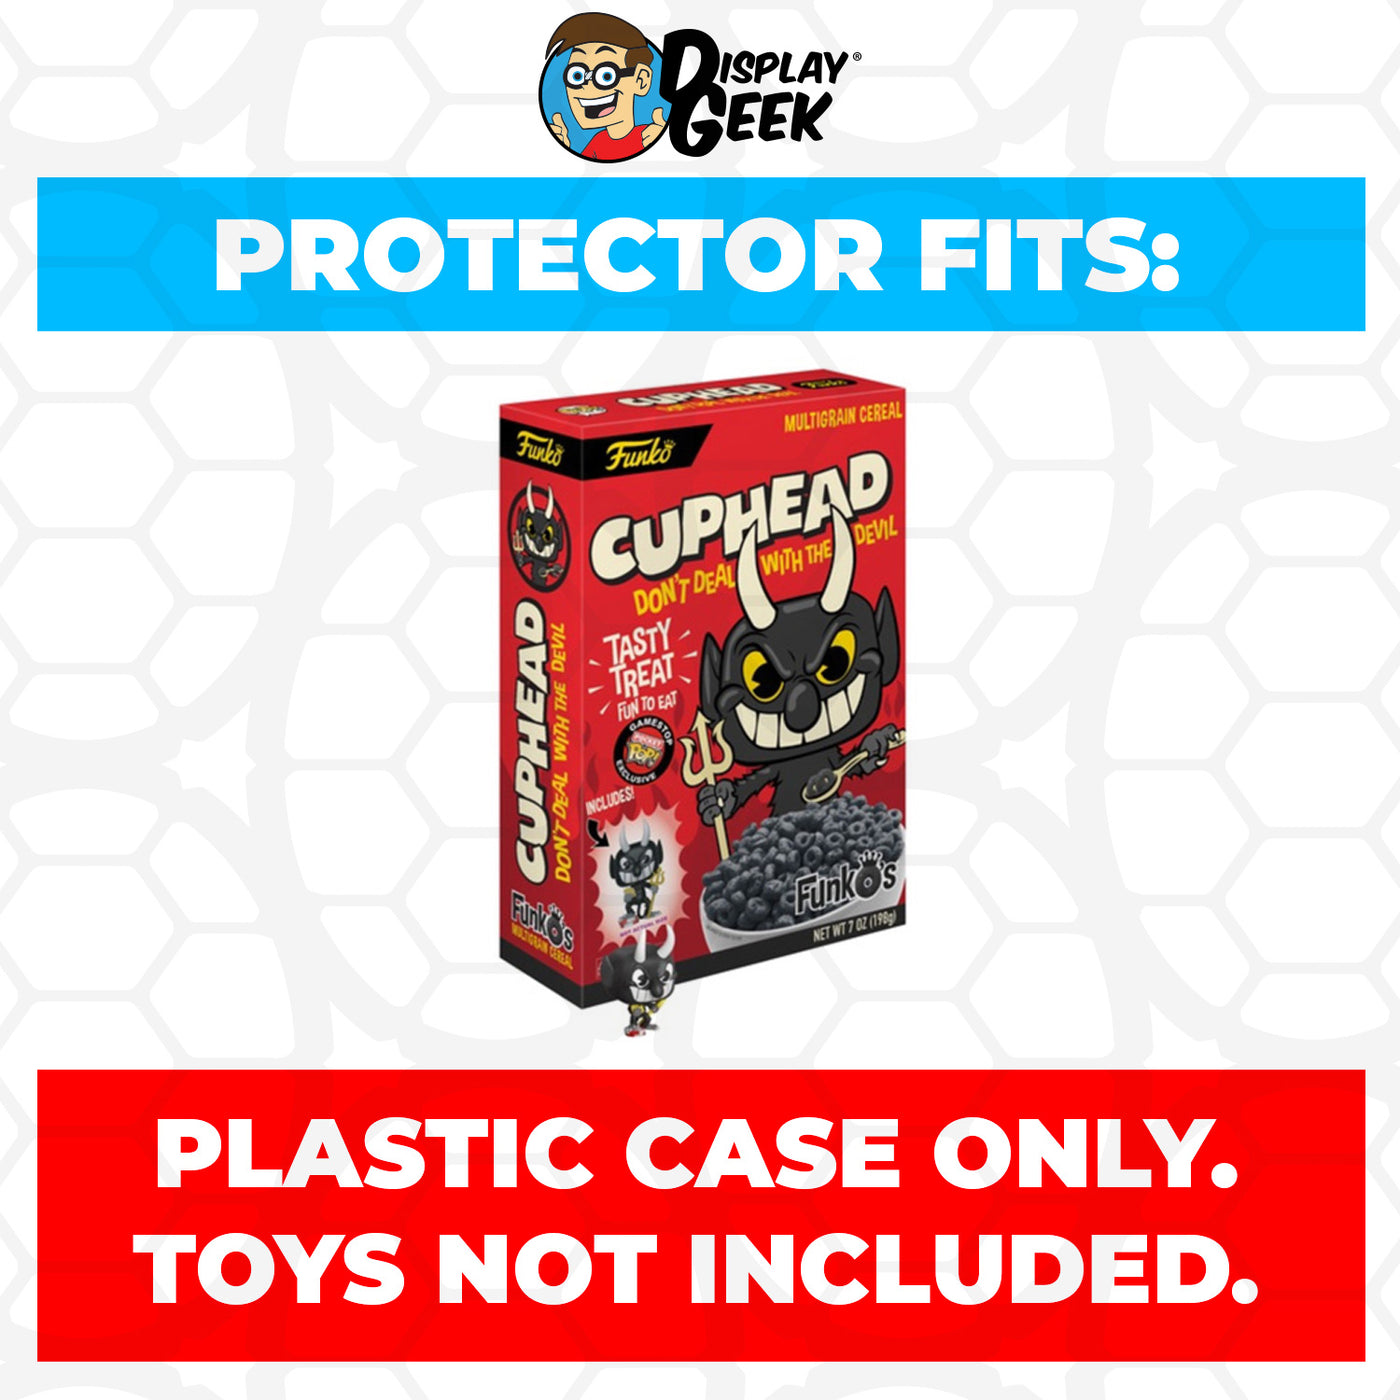 Pop Protector for Cuphead The Devil FunkO's Cereal Box on The Protector Guide App by Display Geek